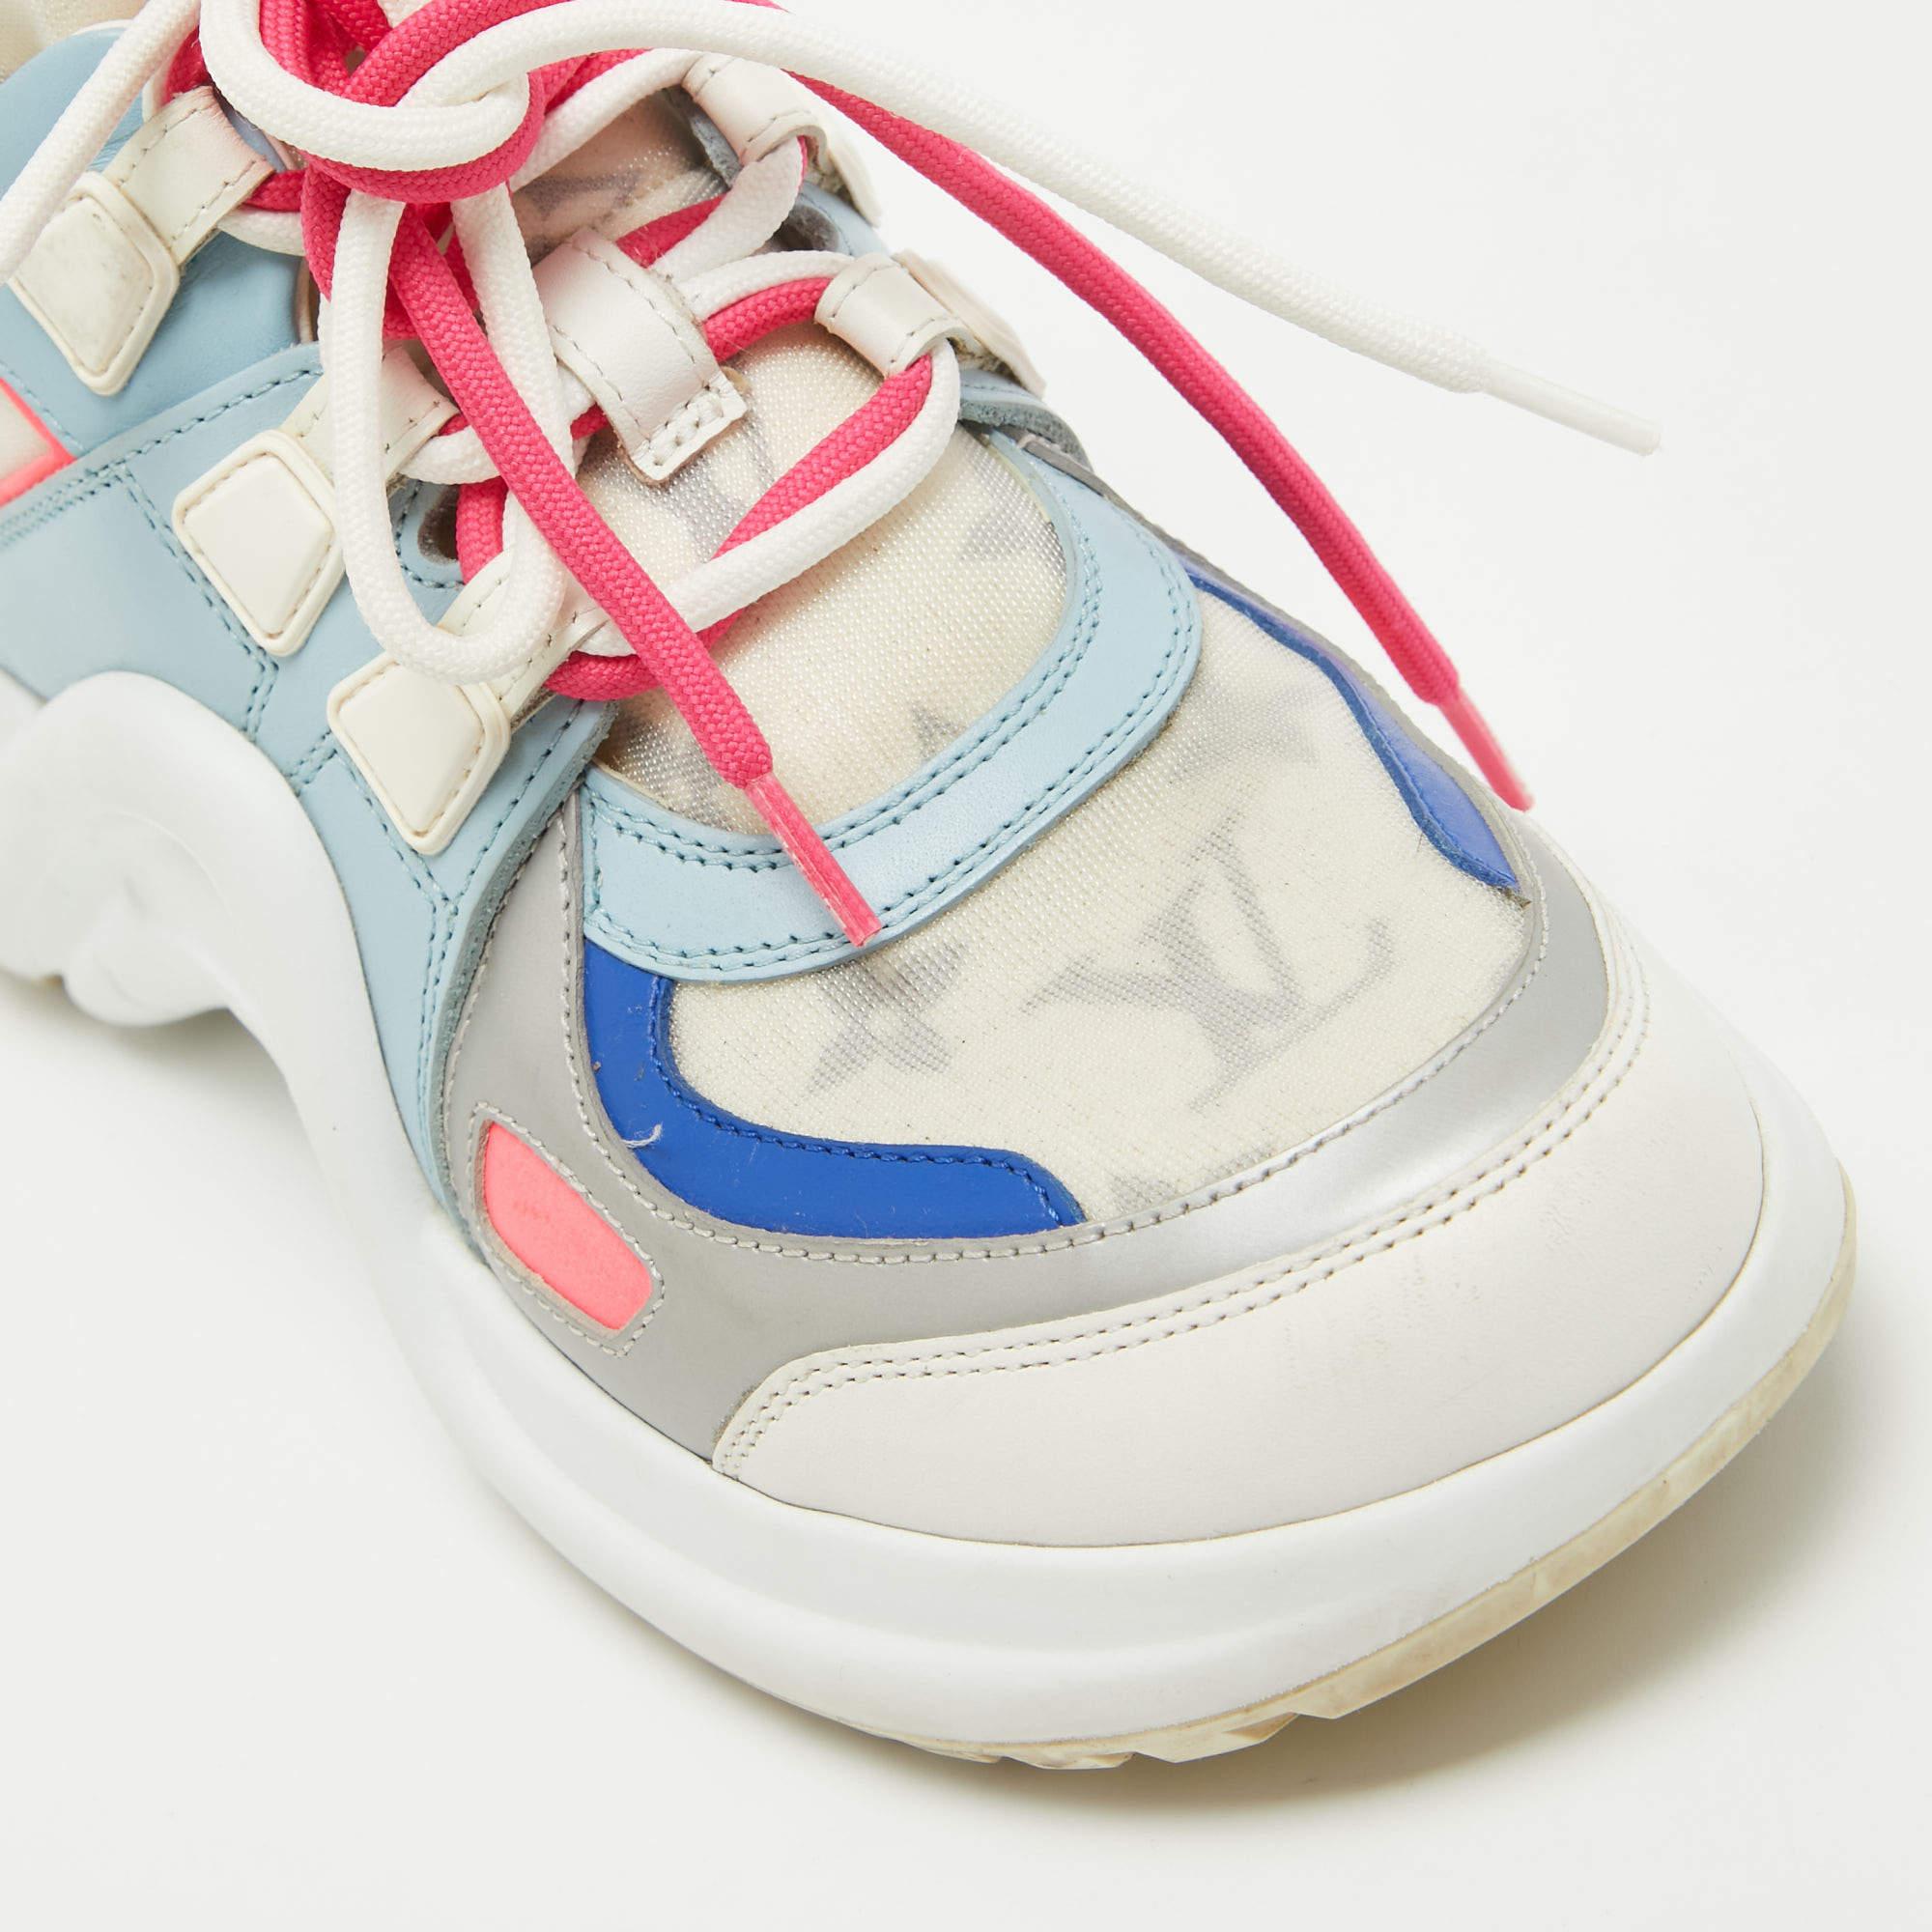 Louis Vuitton Multicolor Monogram Mesh and Leather Archlight Sneakers Size 36 For Sale 2